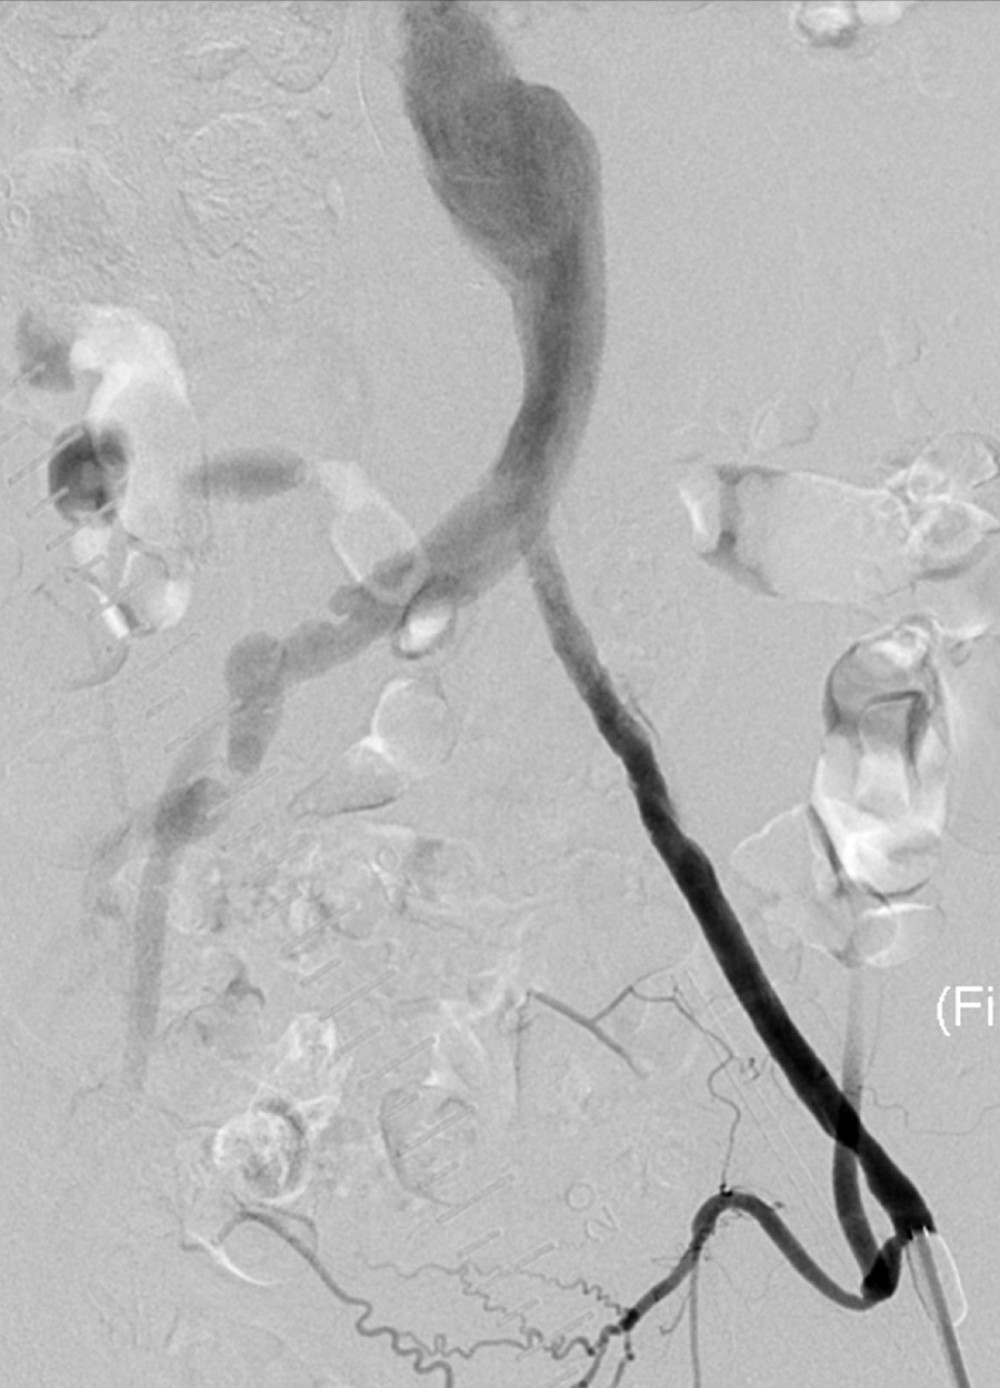 Intraoperative angiography image obtained during iliac artery endovascular recanalization to open the left iliac artery. Angiography performed via the left femoral artery after iliac artery endovascular recanalization.